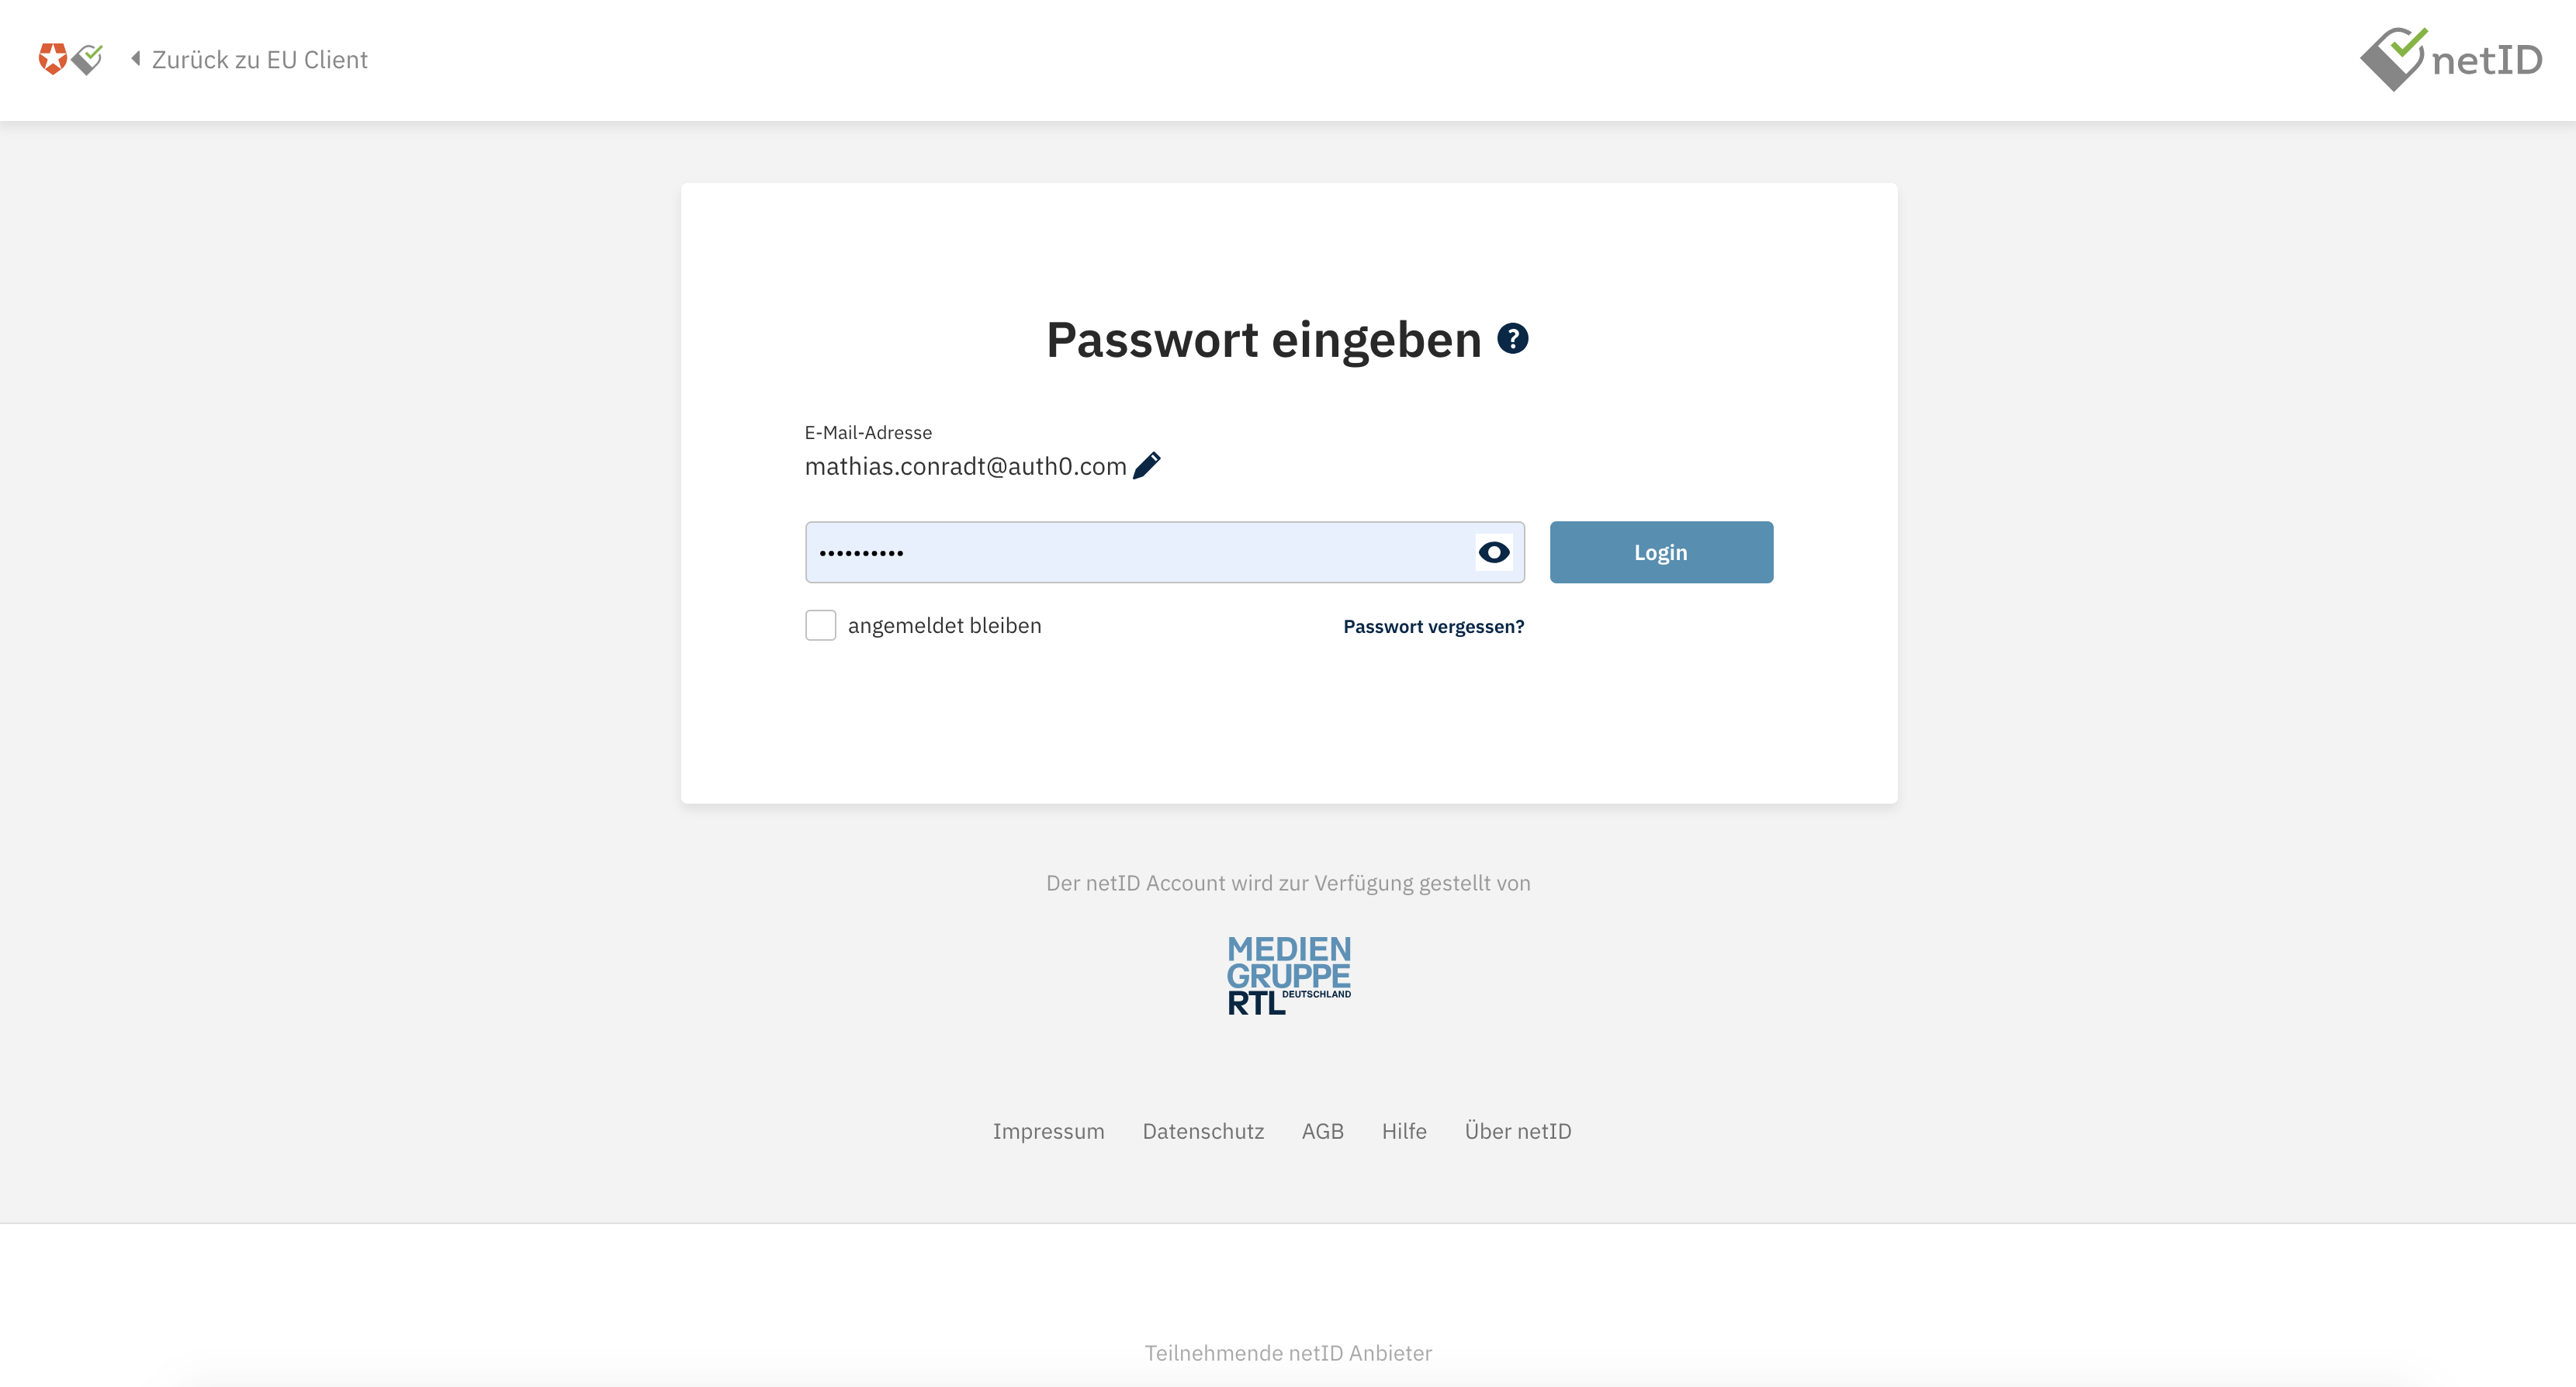 The netID password entry screen